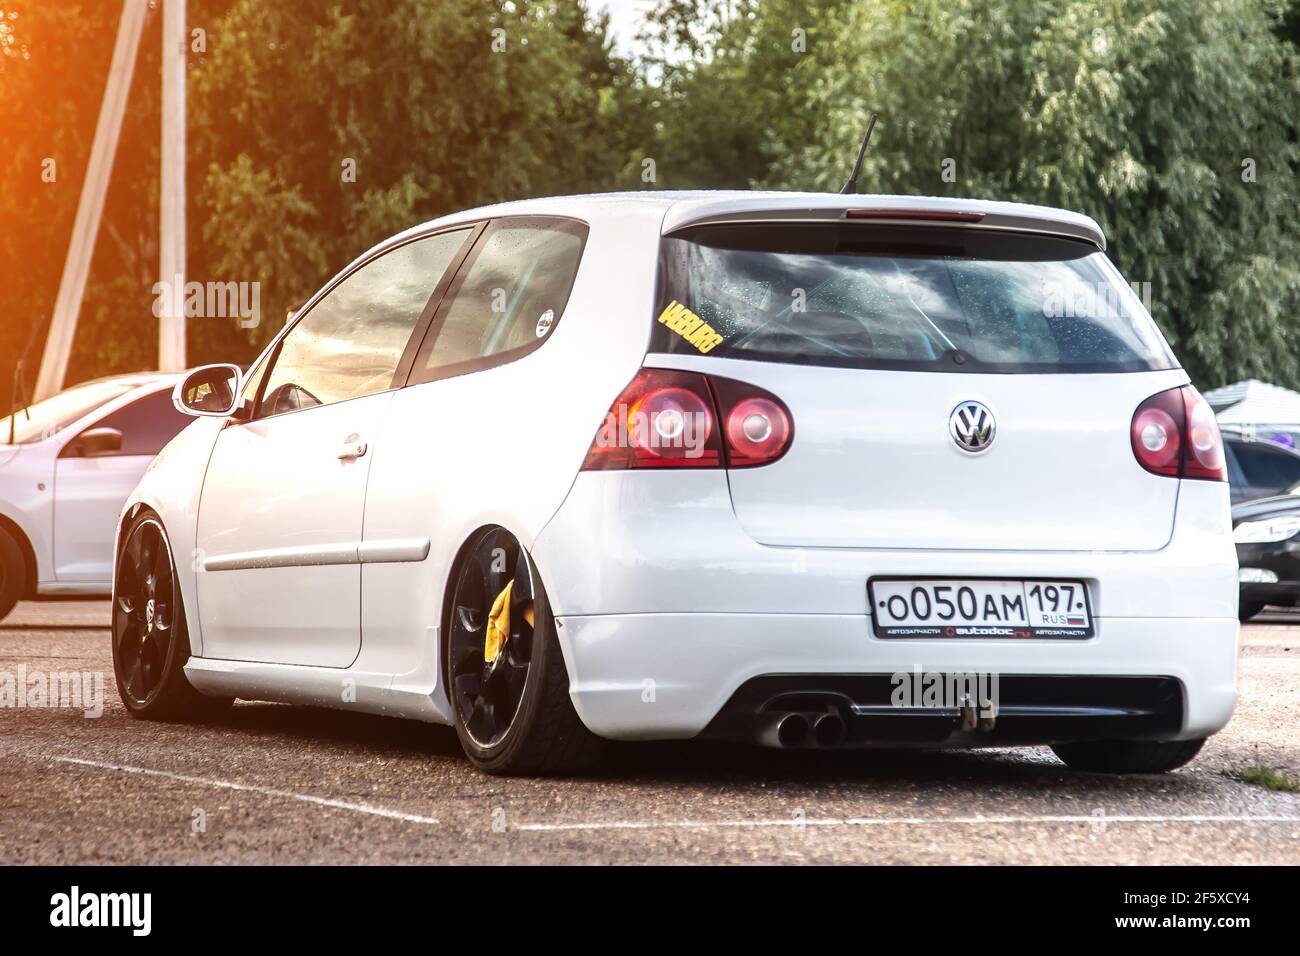 Moscow, Russia - July 06, 2019: White tuned Volkswagen Golf MK5. The back  of the car with